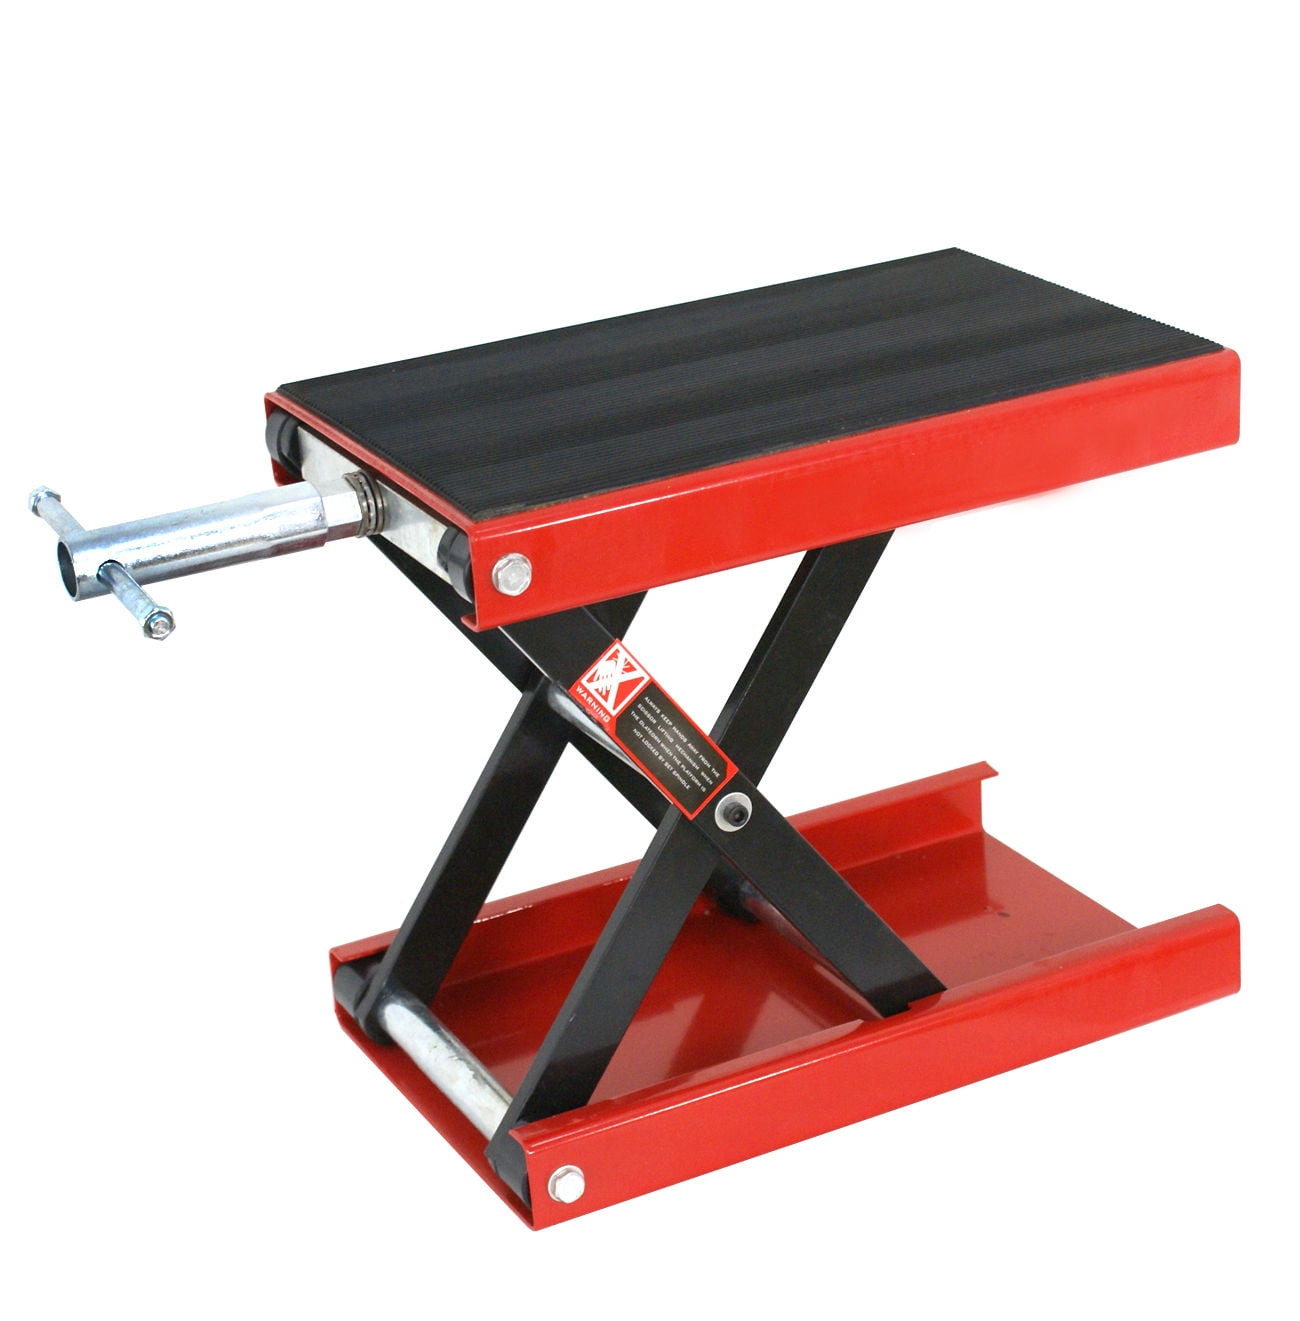 motorcycle center scissor lift jack,Scissor Stand for Motorcycles ATV VEVOR Motorcycle Jack 1100 lb,Scissor Lift Stand with protective paint covered cradles 